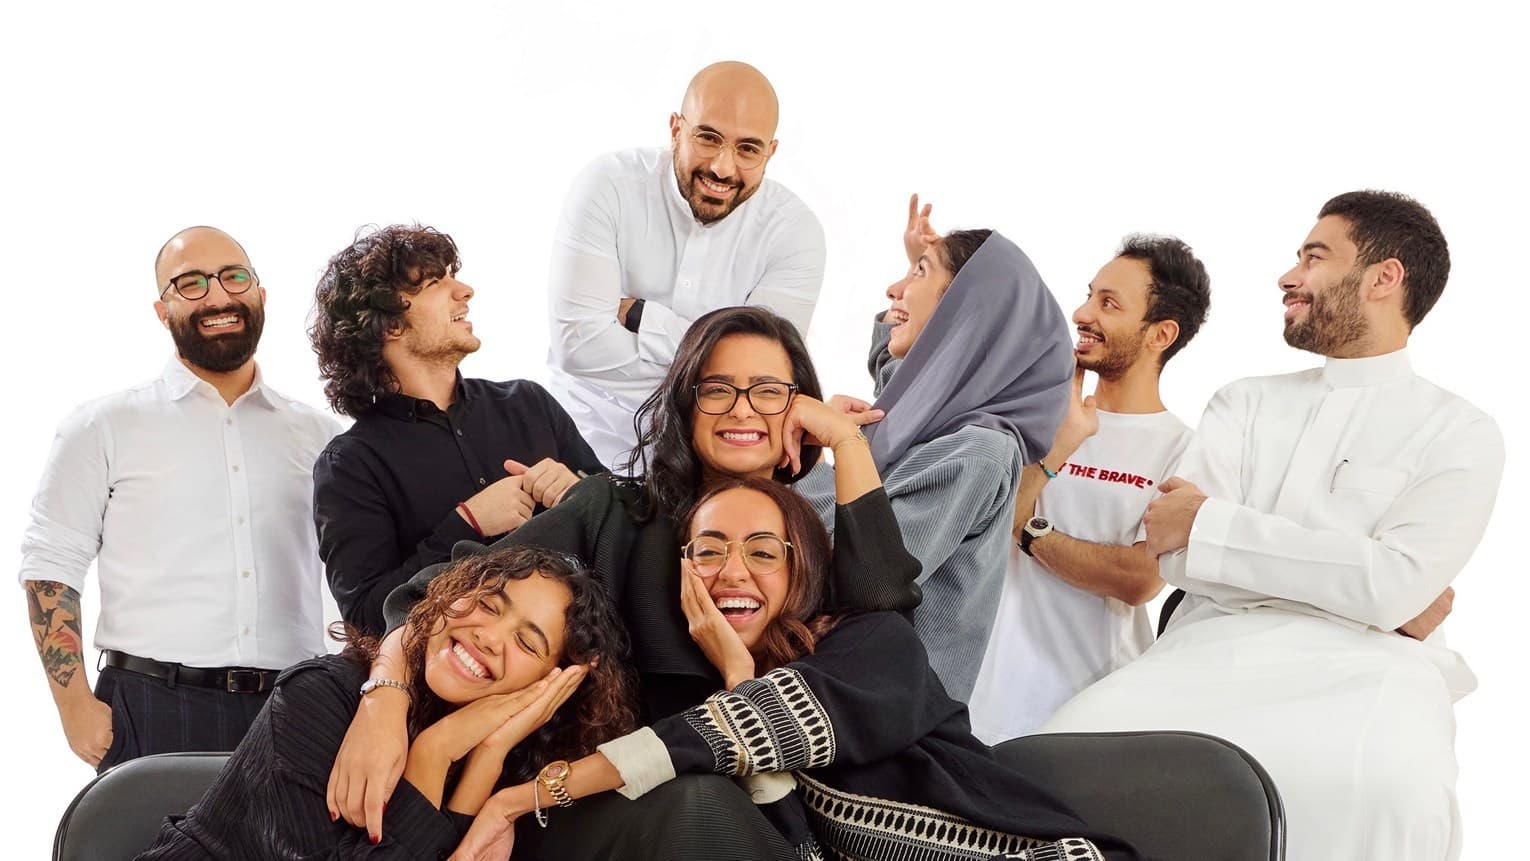 Nuqtah’s current founding team at their last team retreat. From left to right: Wajd, Shahm, Mohammed, Nouf, Murtada, Majid, Salwa, Noura & Jawhara.